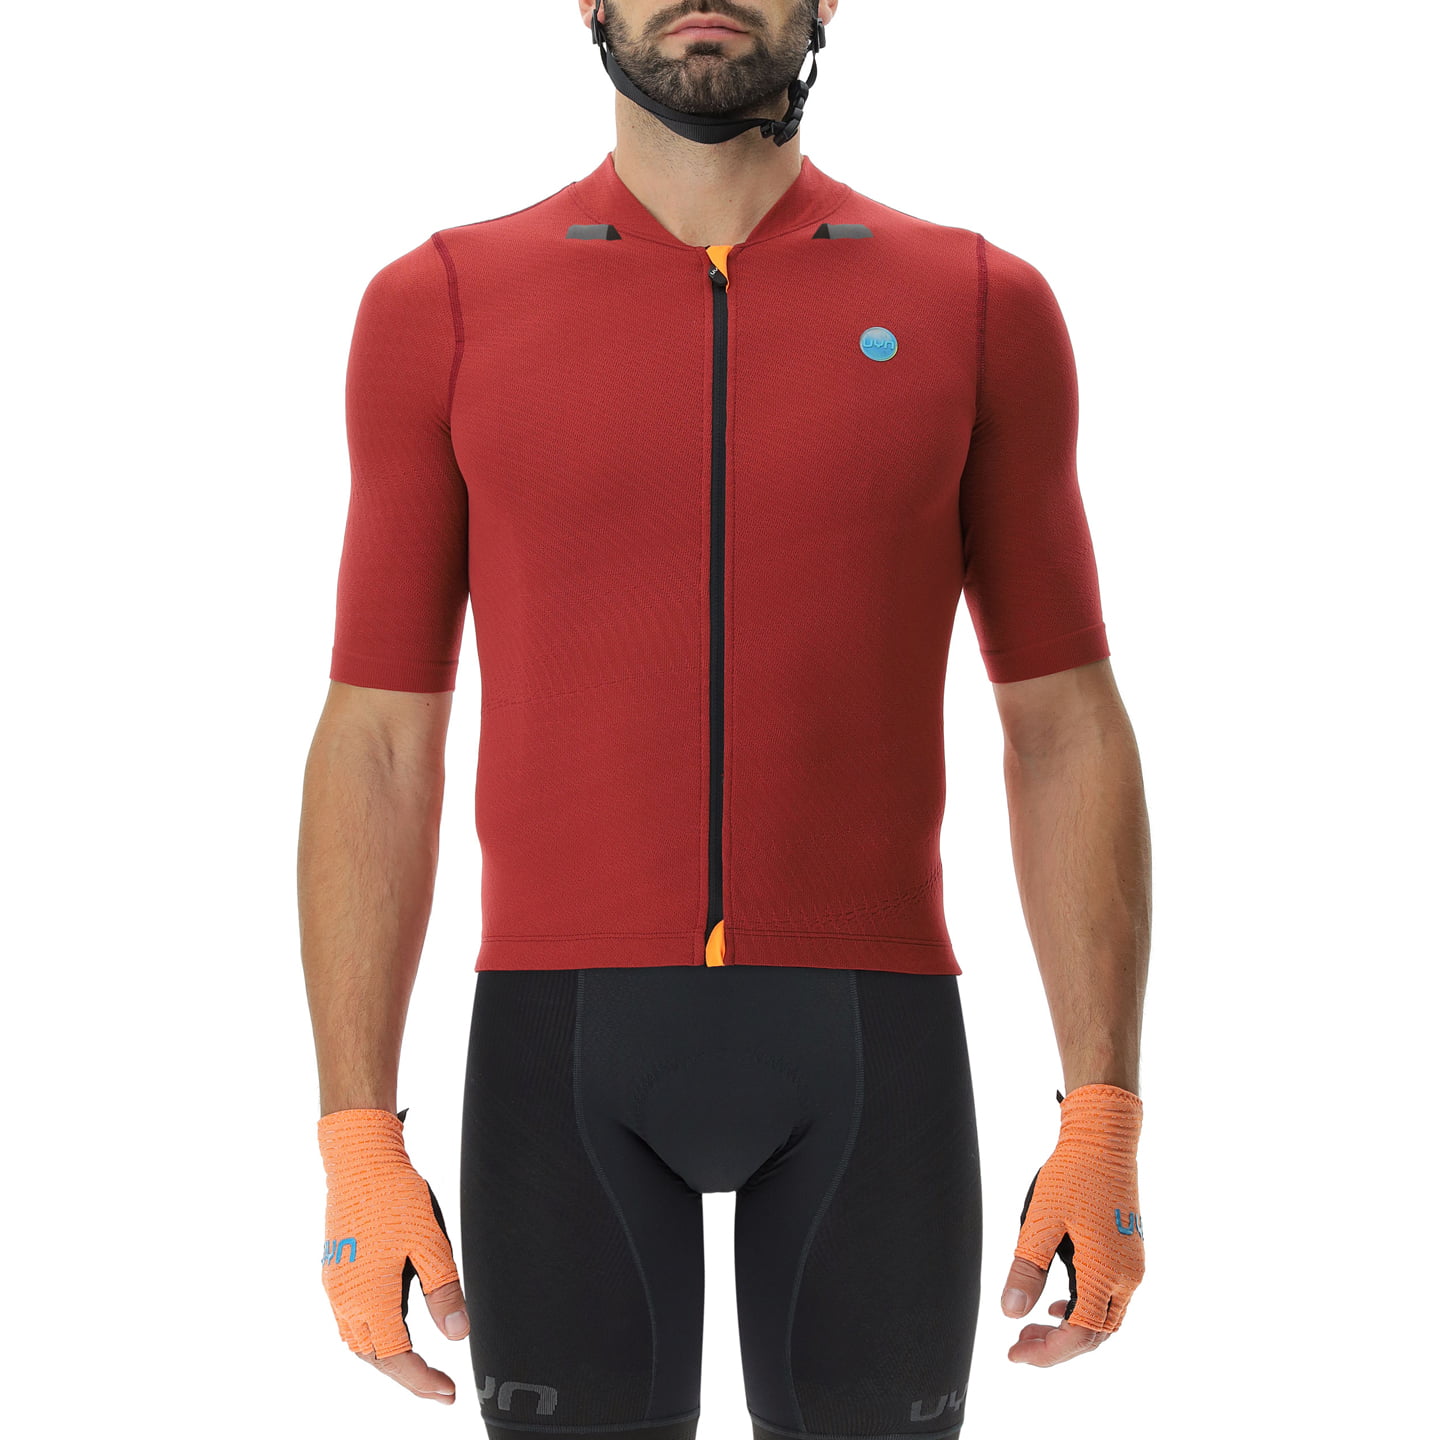 UYN Lightspeed Short Sleeve Jersey, for men, size XL, Cycling jersey, Cycle clothing